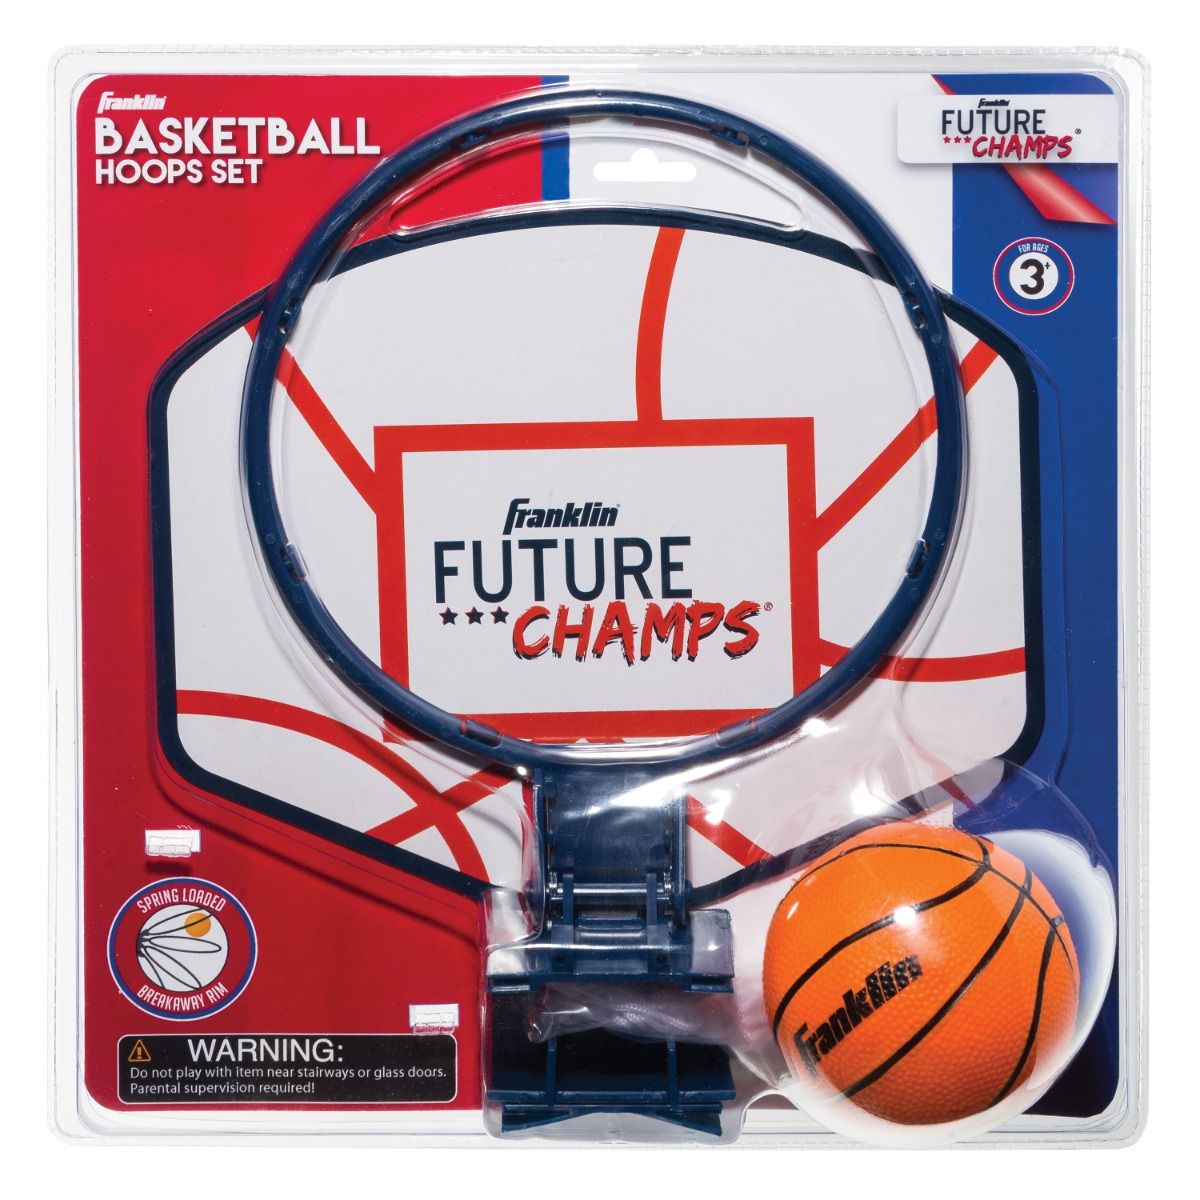 Over the Door Mini Basketball Set Cover